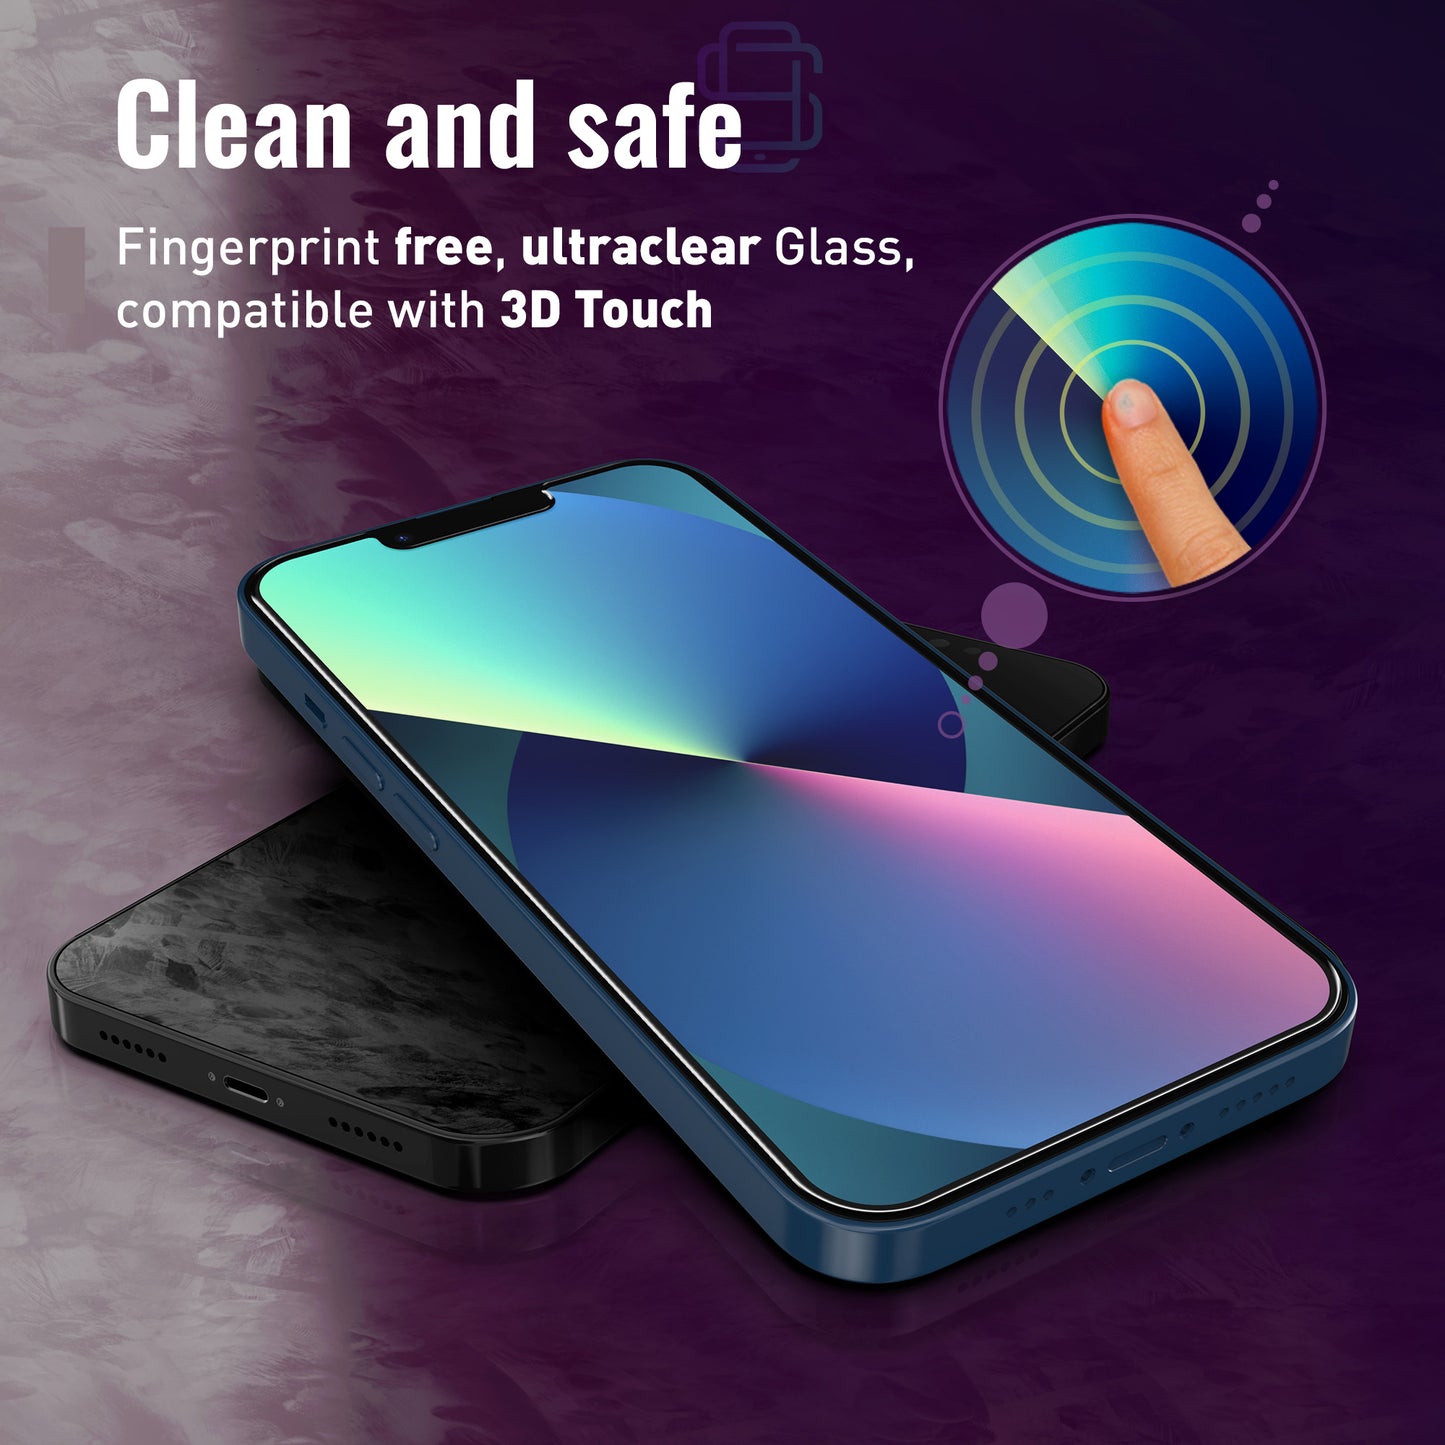 Defenslim iPhone 13/13 Pro Screen Protector [2-Pack] with Easy Auto-Align Install Kit